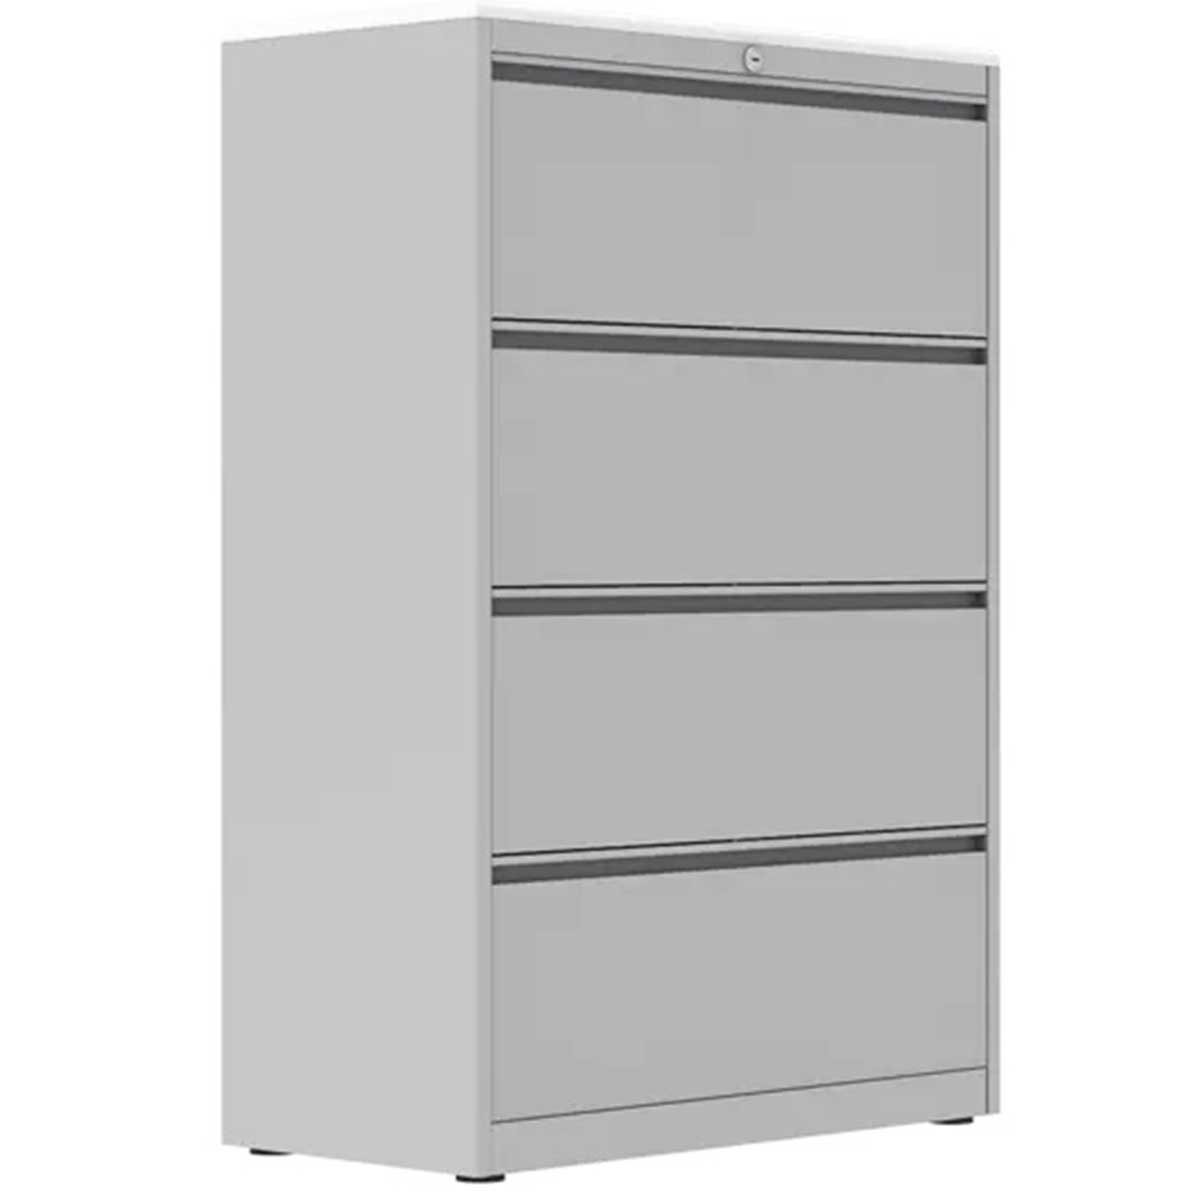 Fire Resistant File Cabinet Manufacturers, Suppliers in Noida Extension